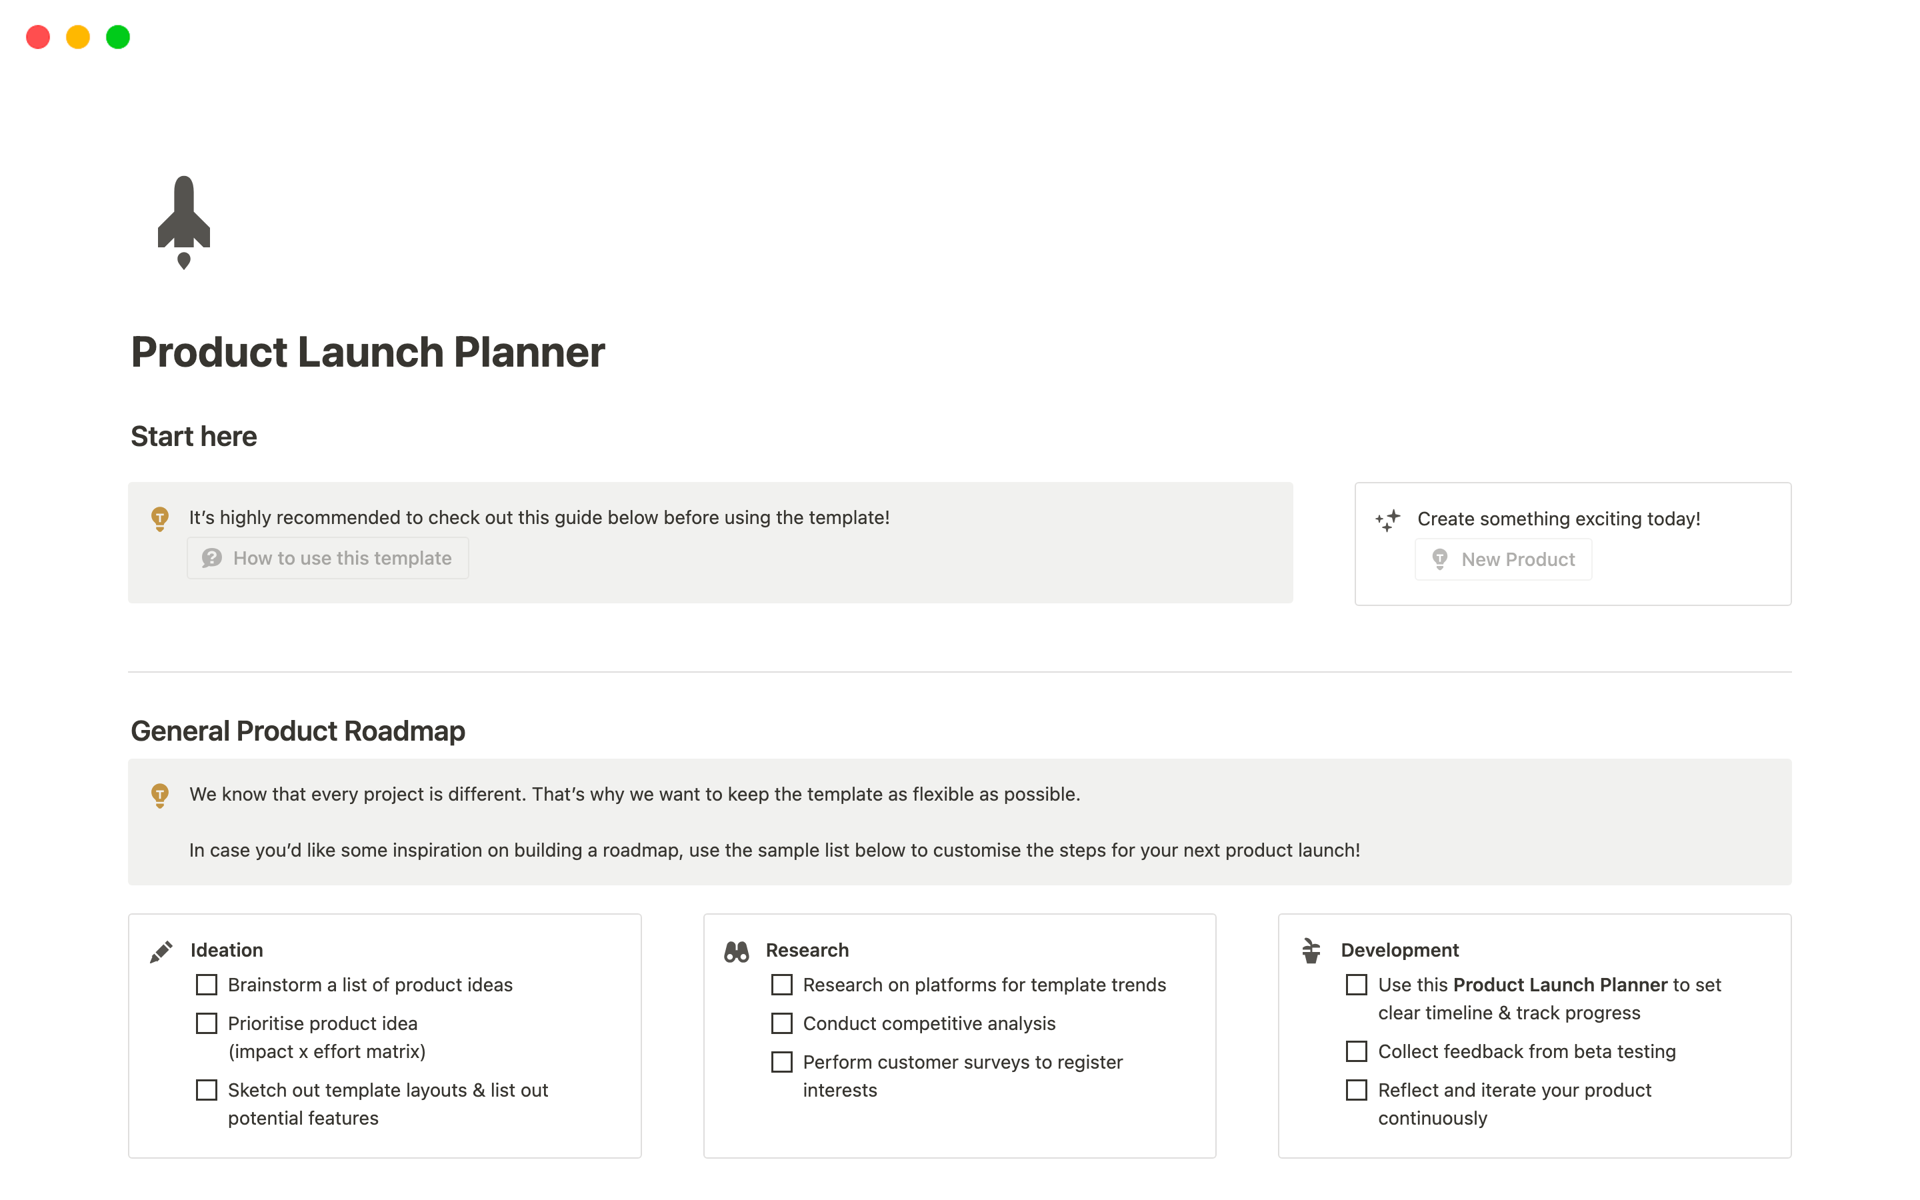 Notion님의 Top 10 Product Launch Plan Templates for Product Development Managers 컬렉션 스크린샷